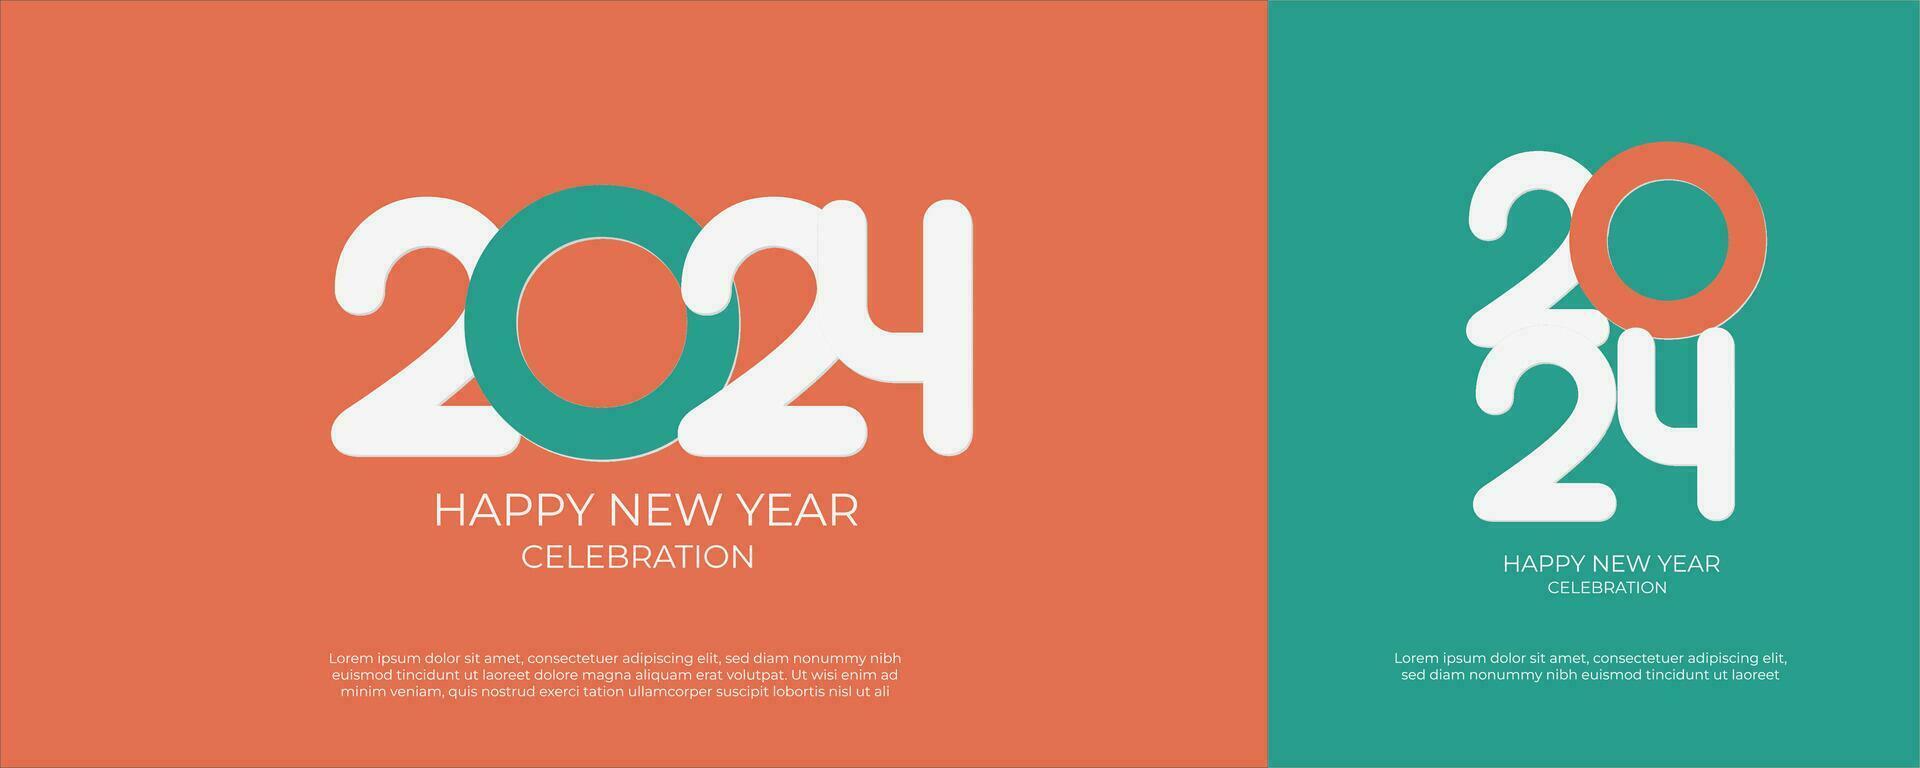 Happy New Year 2024. festive realistic decoration. Celebrate 2024 party on a colorful background vector